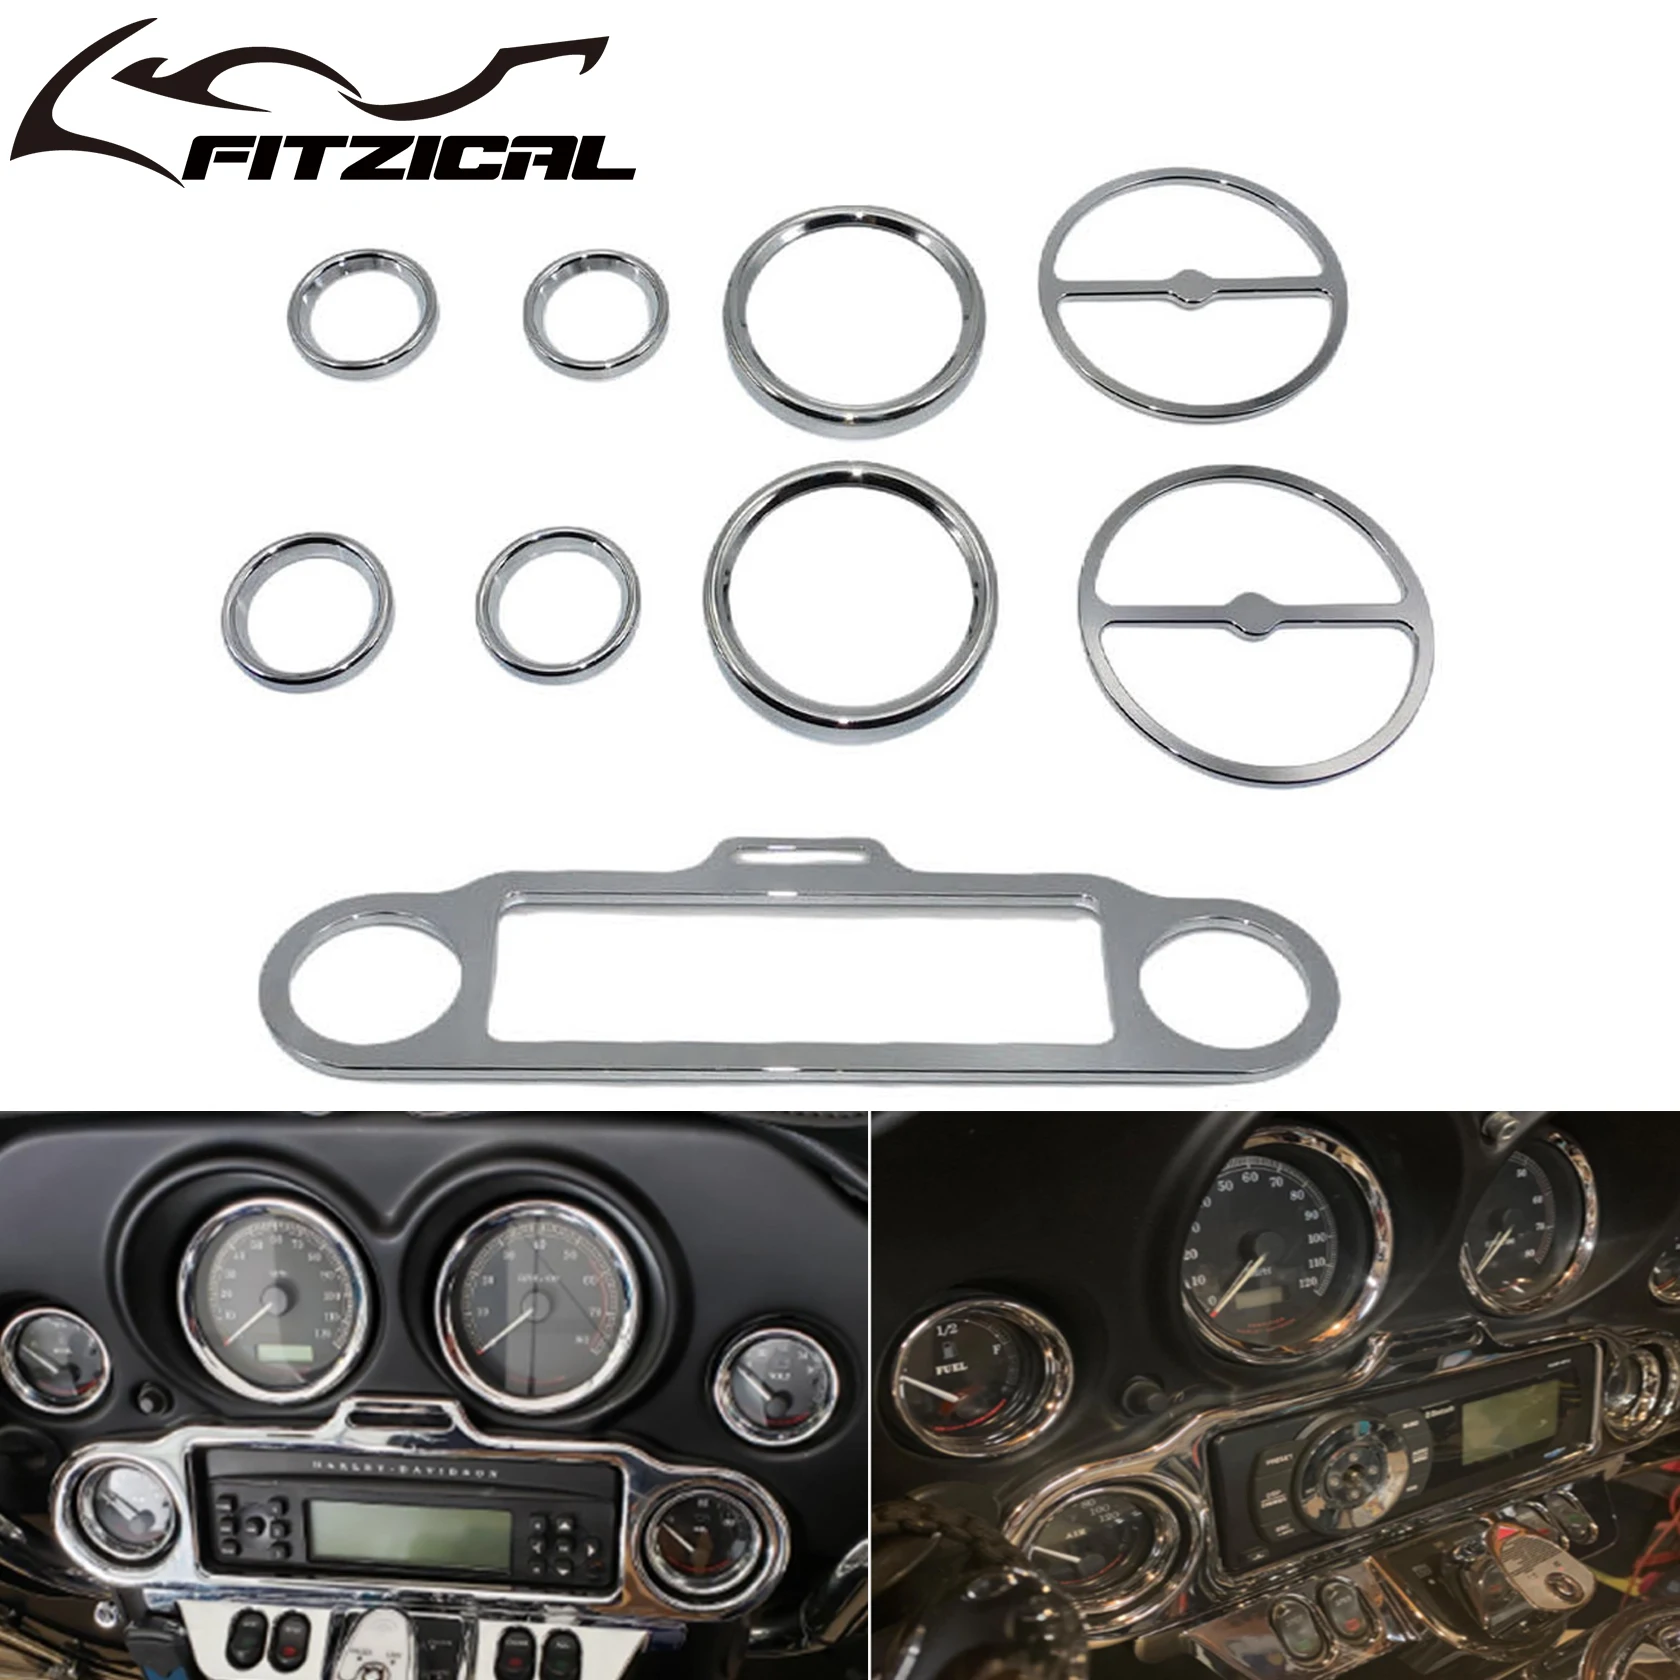 

Motorcycle Chrome Stereo Accent Speedometer Speaker Set Cover Trim Ring For Harley Touring Electra Street Glide Trike 1996-2013